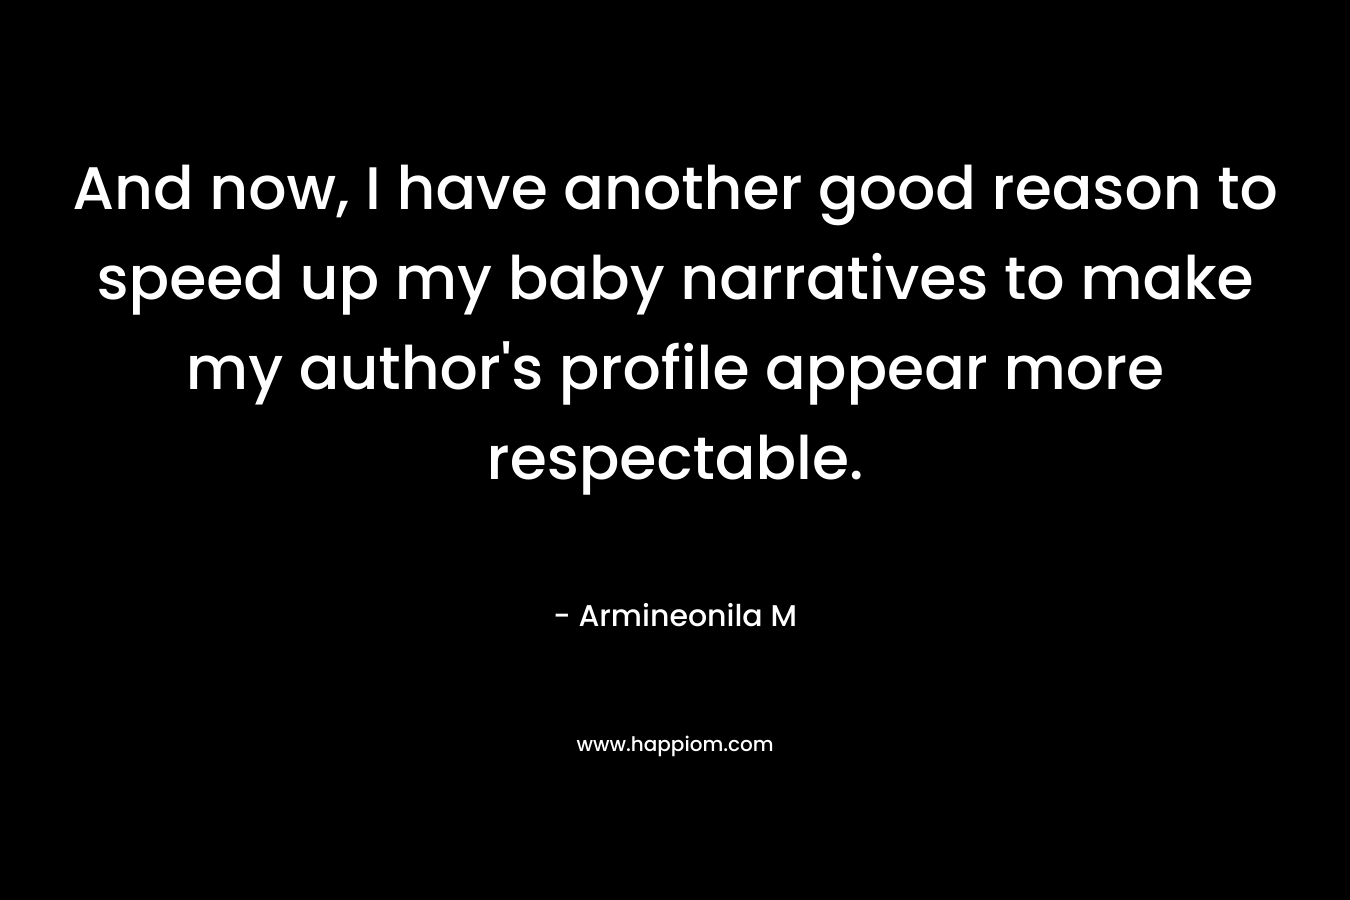 And now, I have another good reason to speed up my baby narratives to make my author’s profile appear more respectable. – Armineonila M